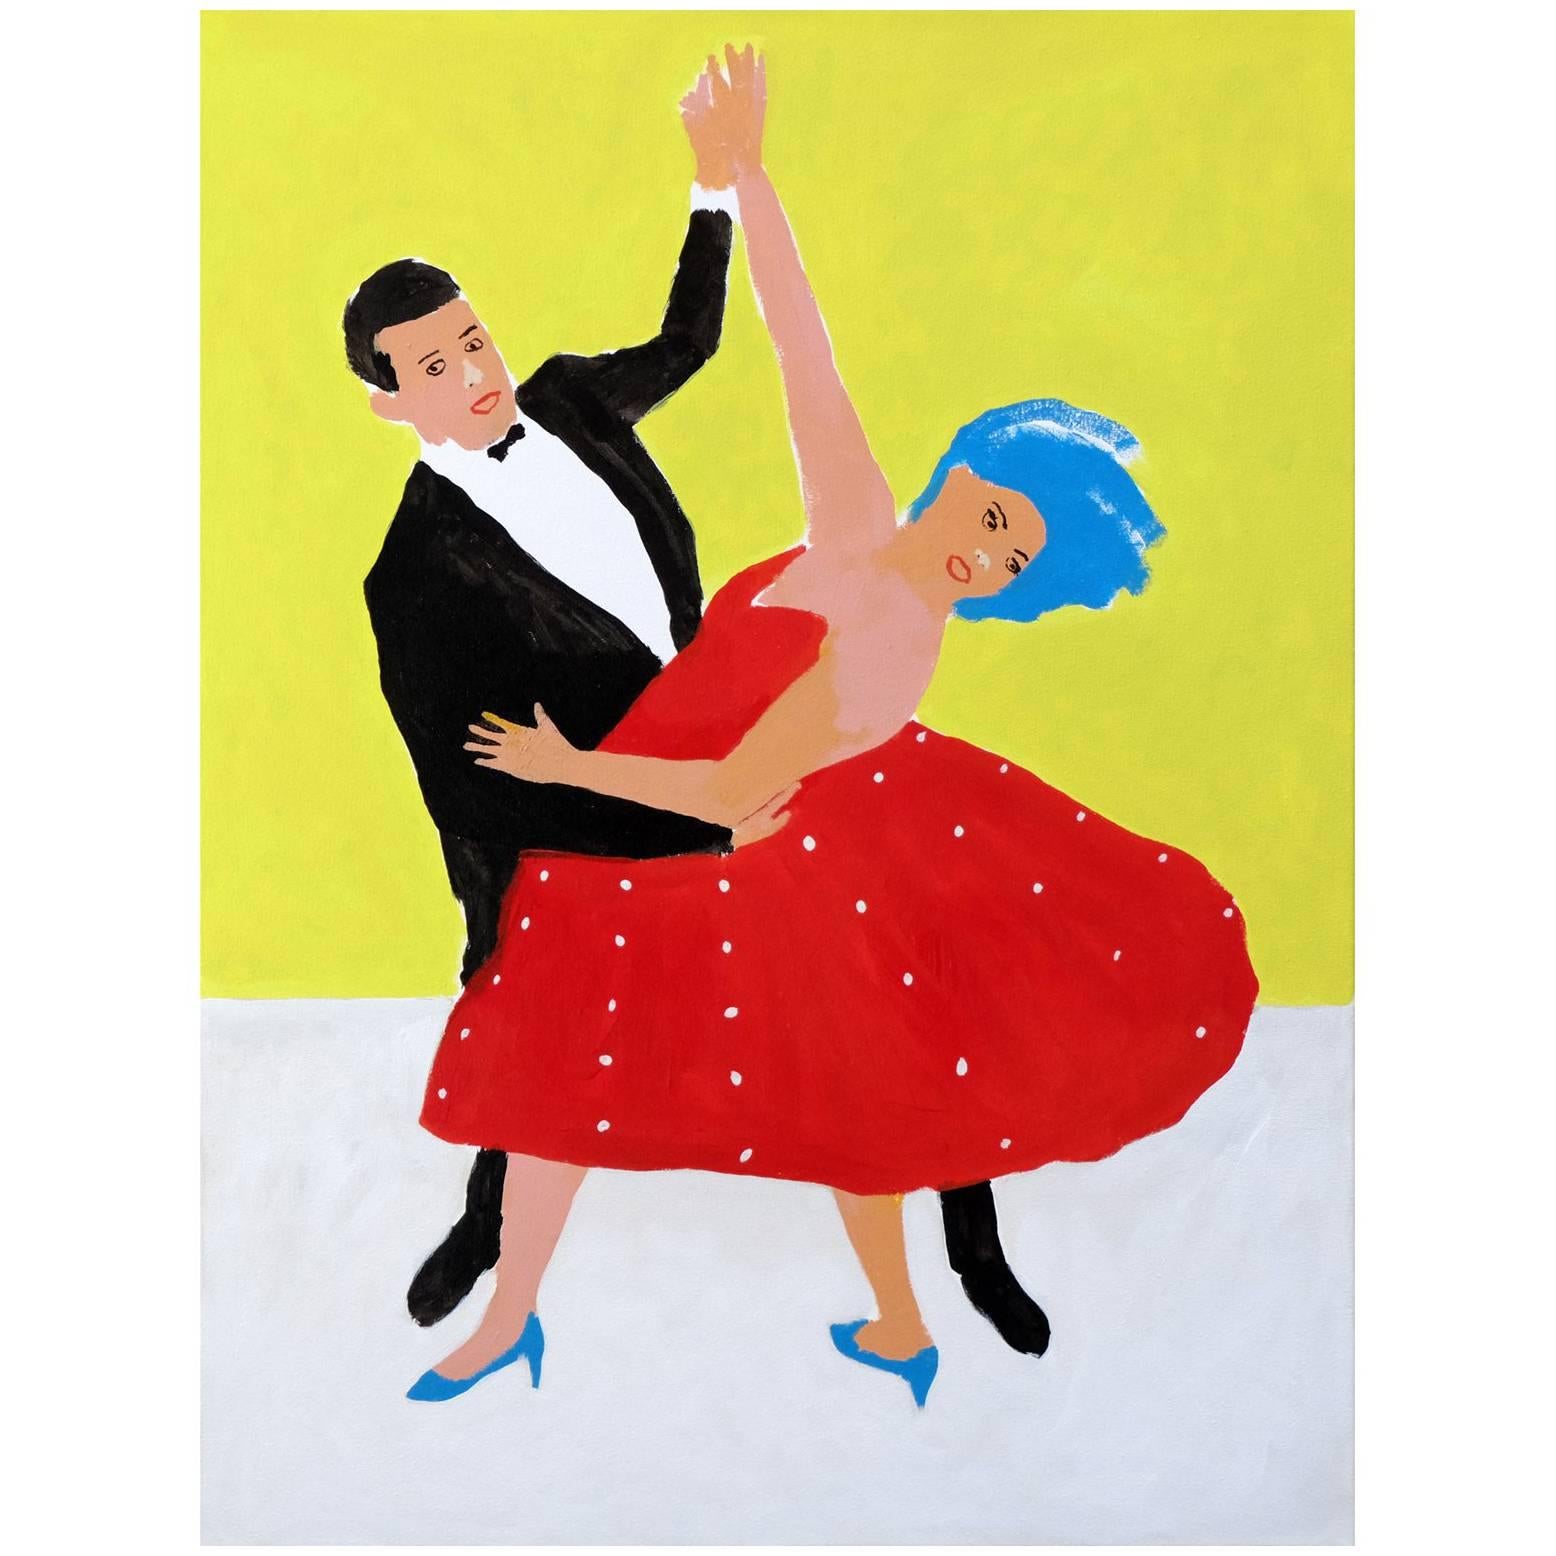 'The Enthusiasts' Portrait Painting by Alan Fears Pop Art Dancing